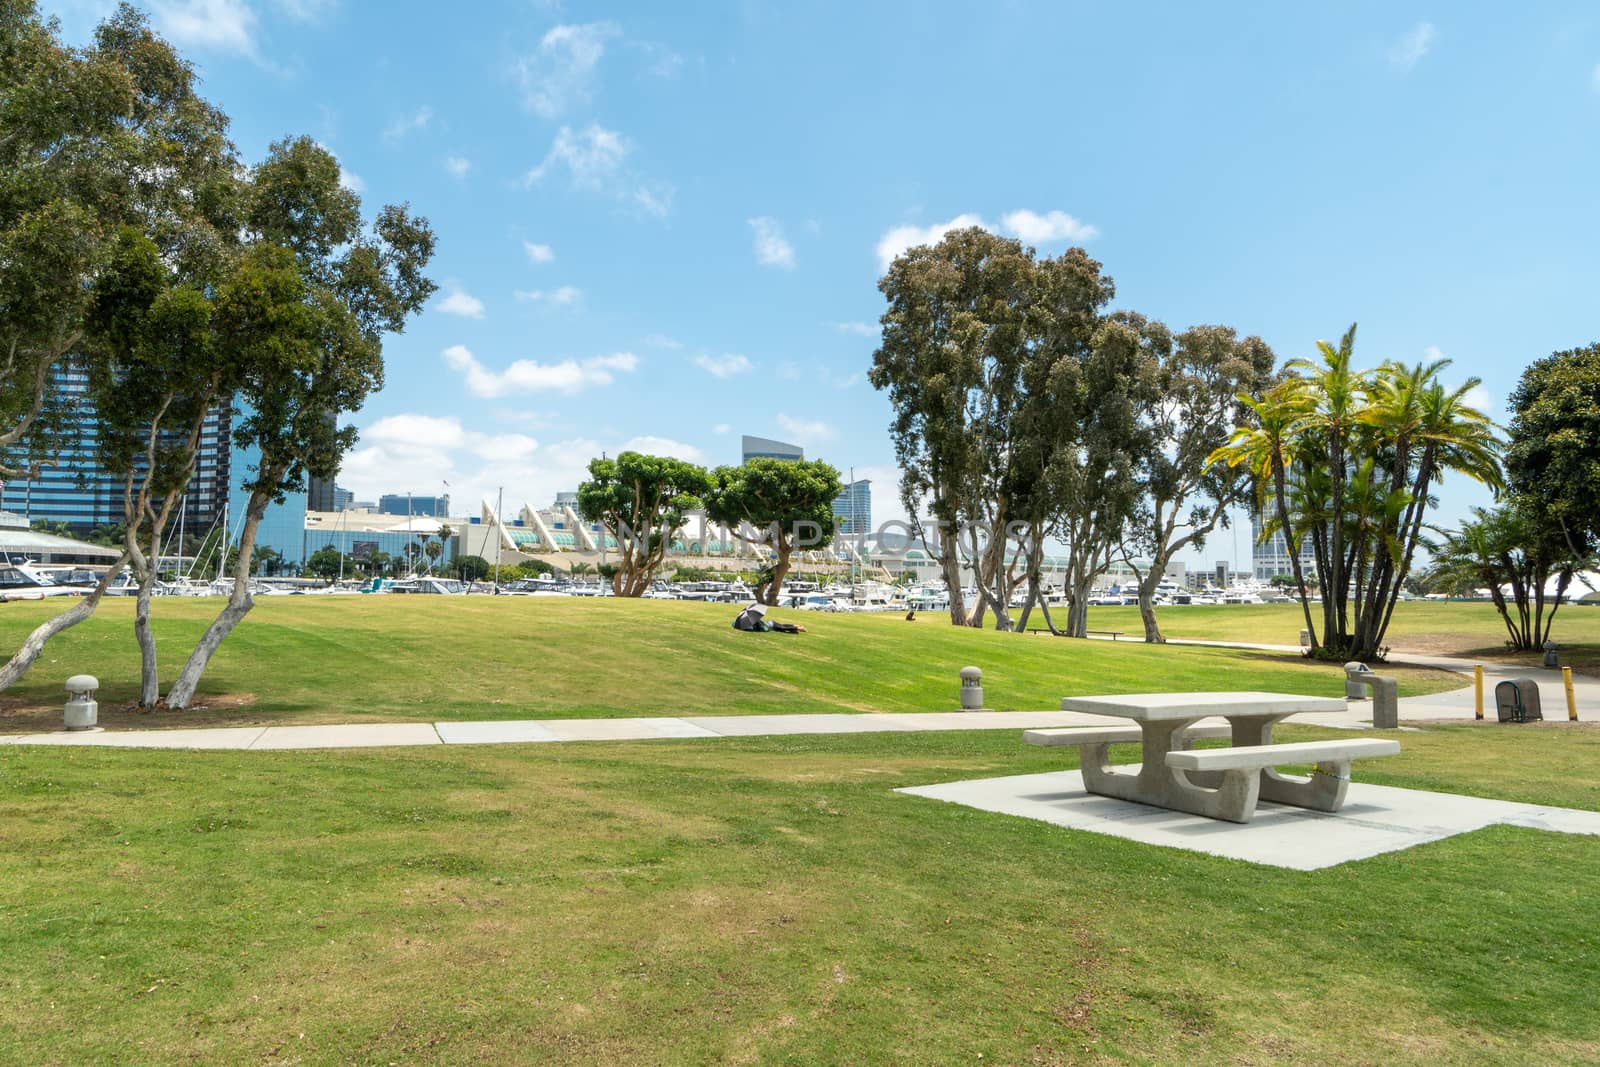 Waterfront public park with benches at the Embarcadero Marina Park South, San Diego Downtown. California. USA